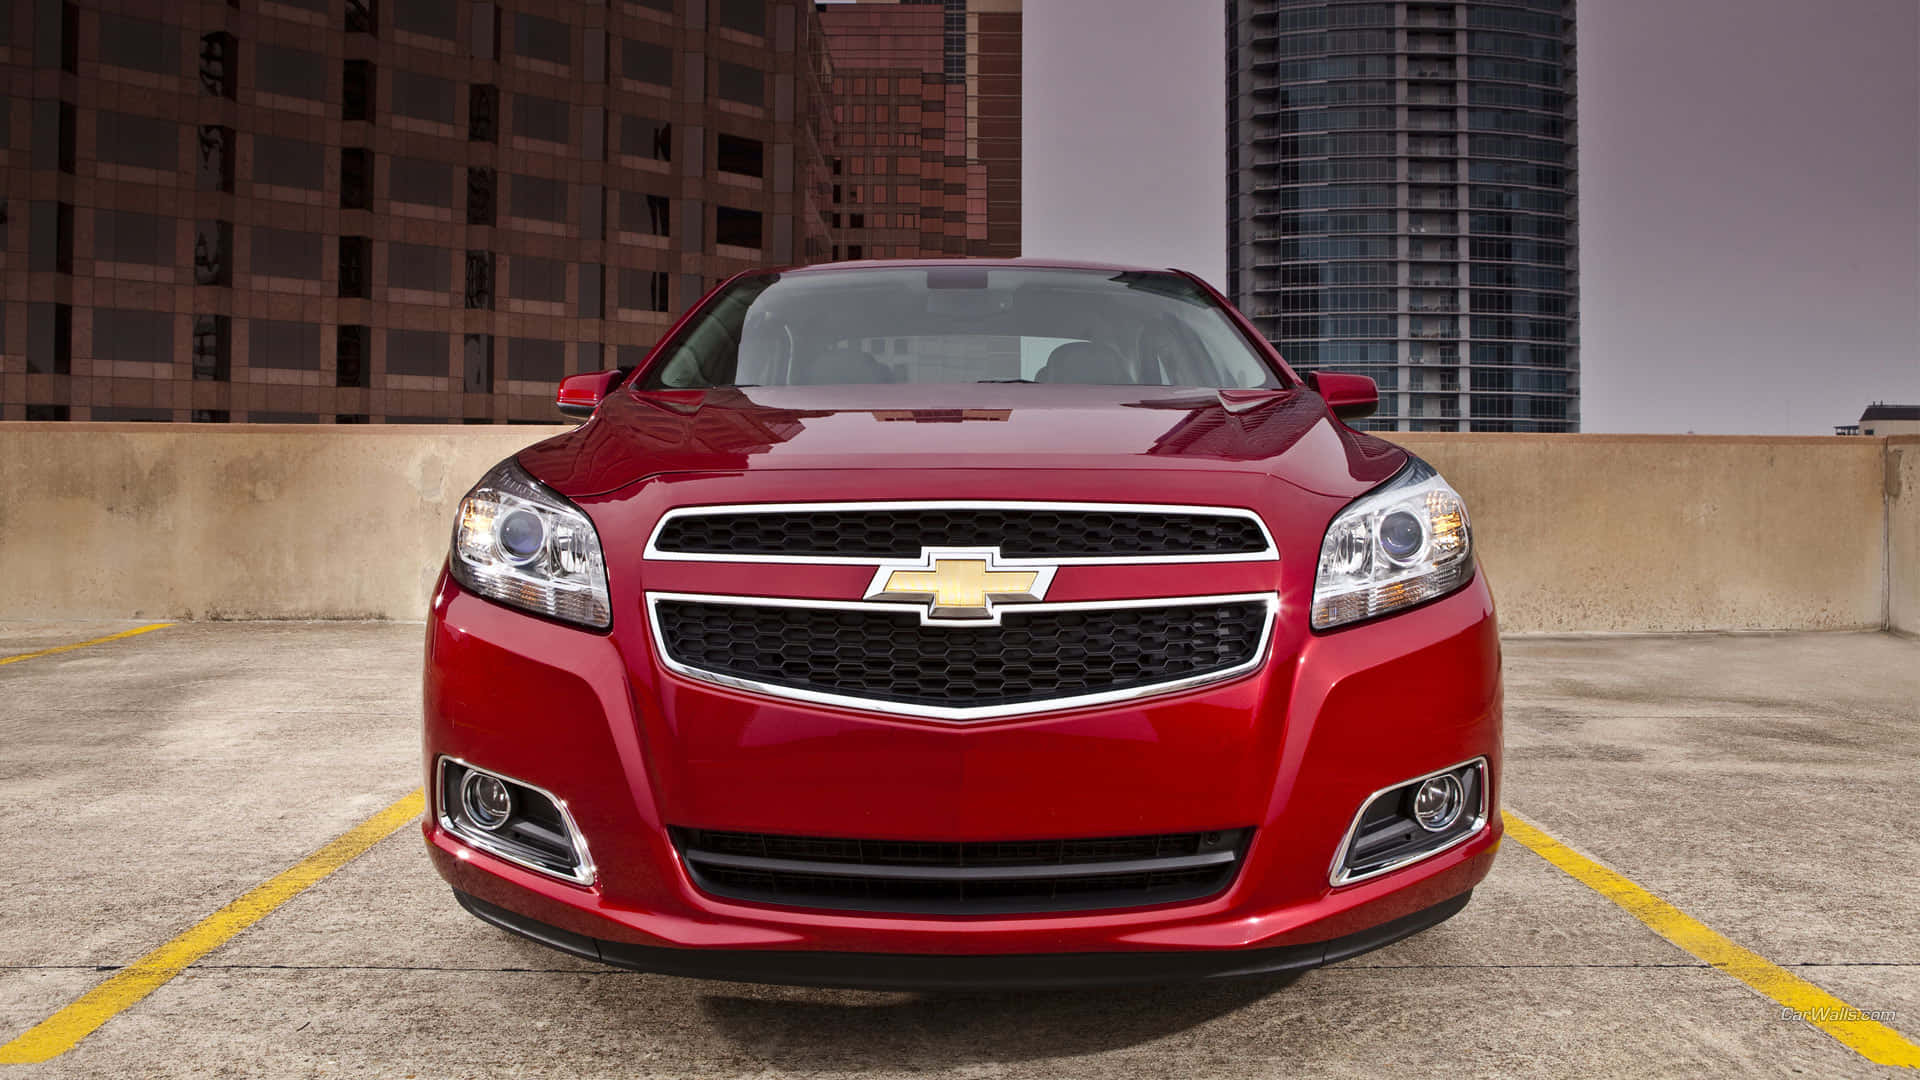 Cruise the streets in style with the sleek Chevy Malibu Wallpaper